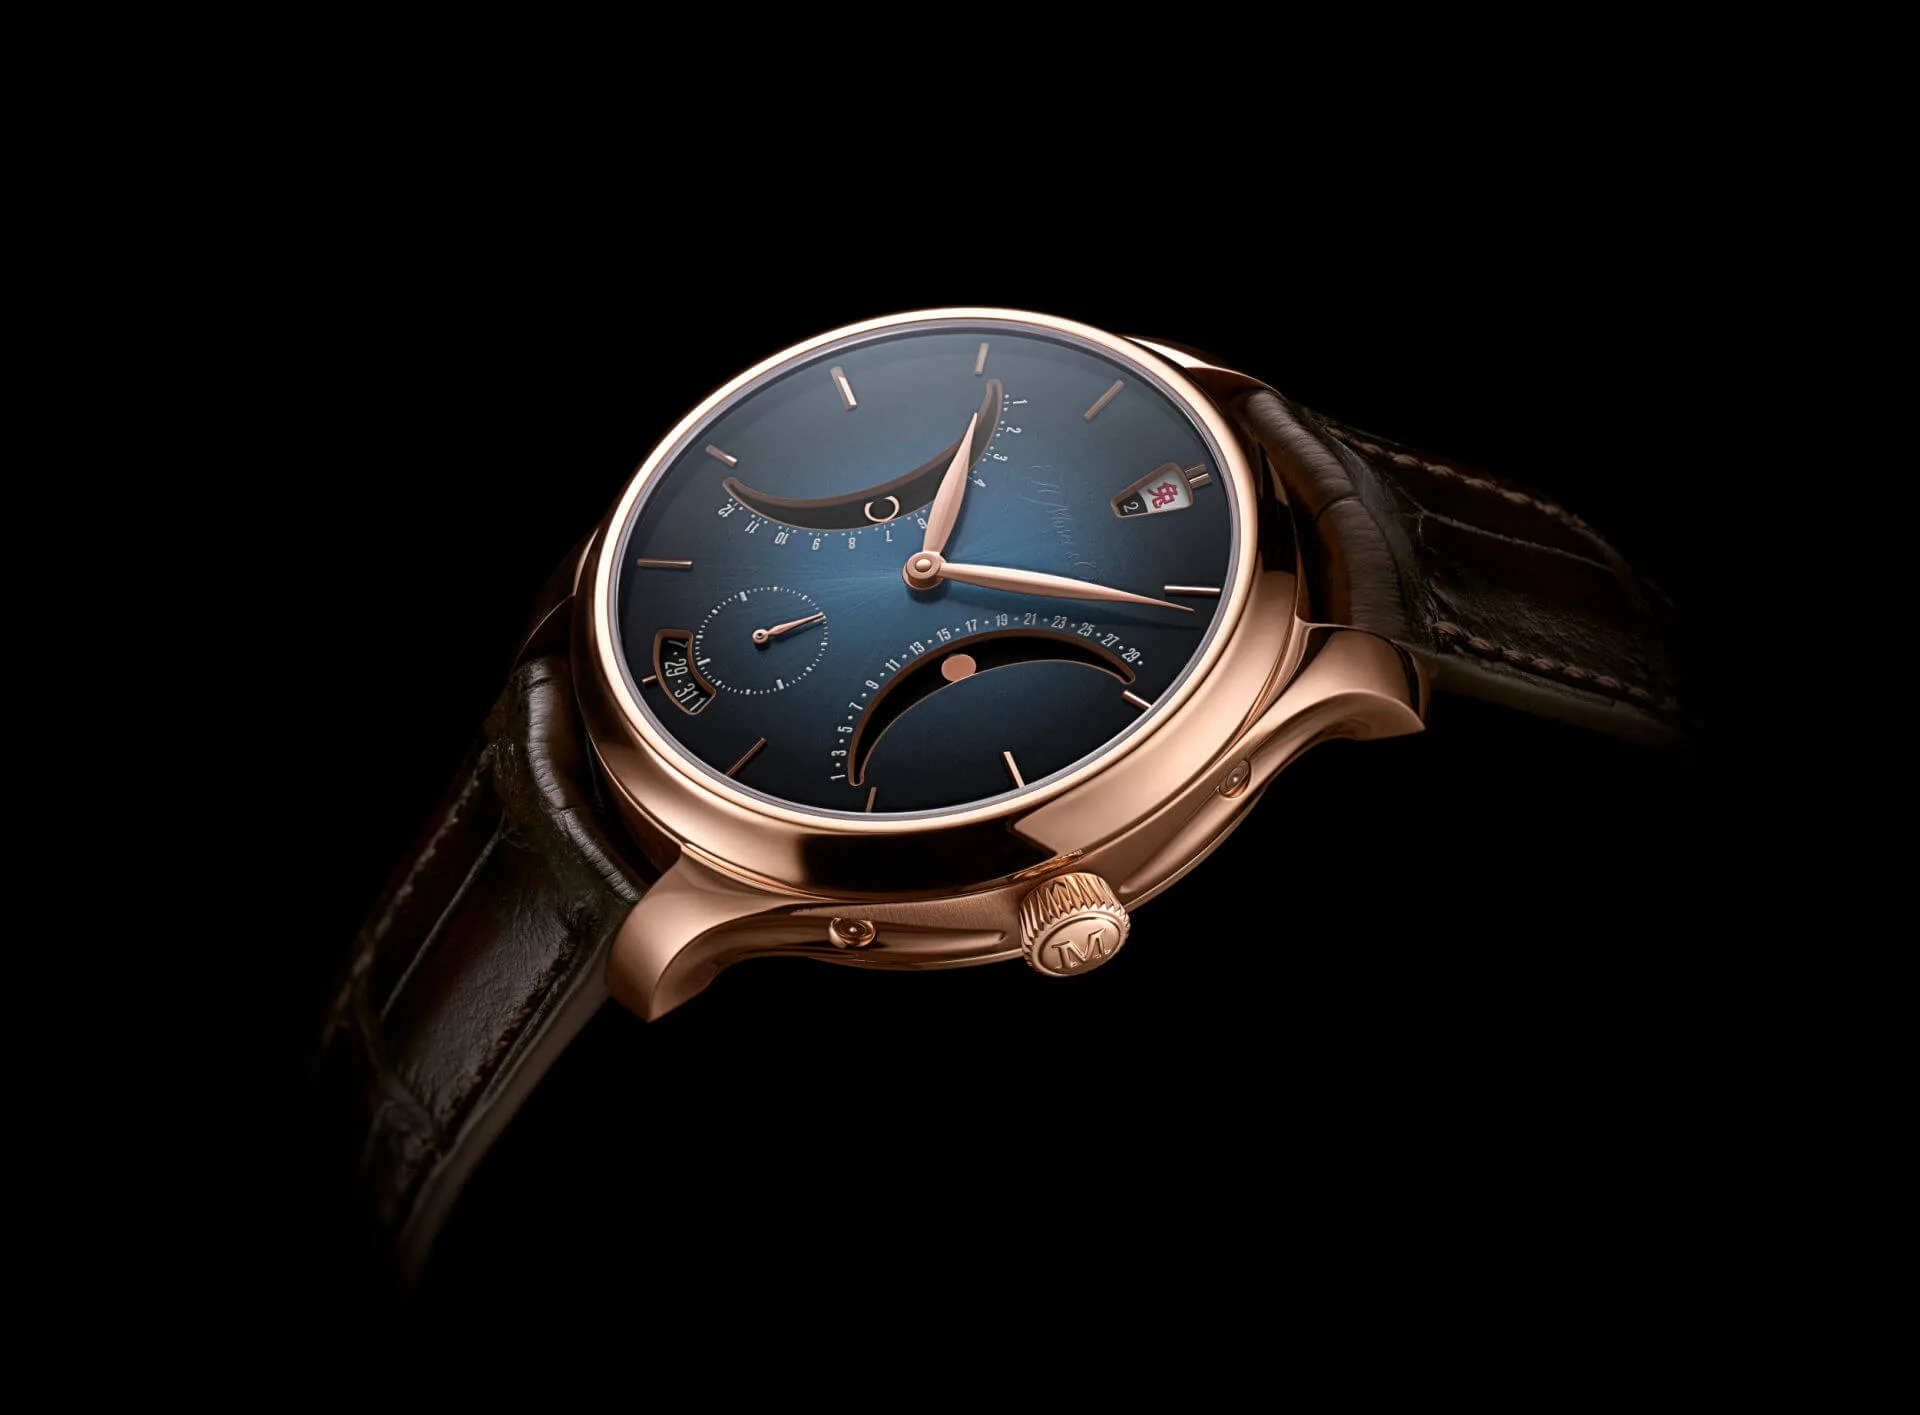 H. Moser & Cie. presents the Endeavour Chinese Calendar